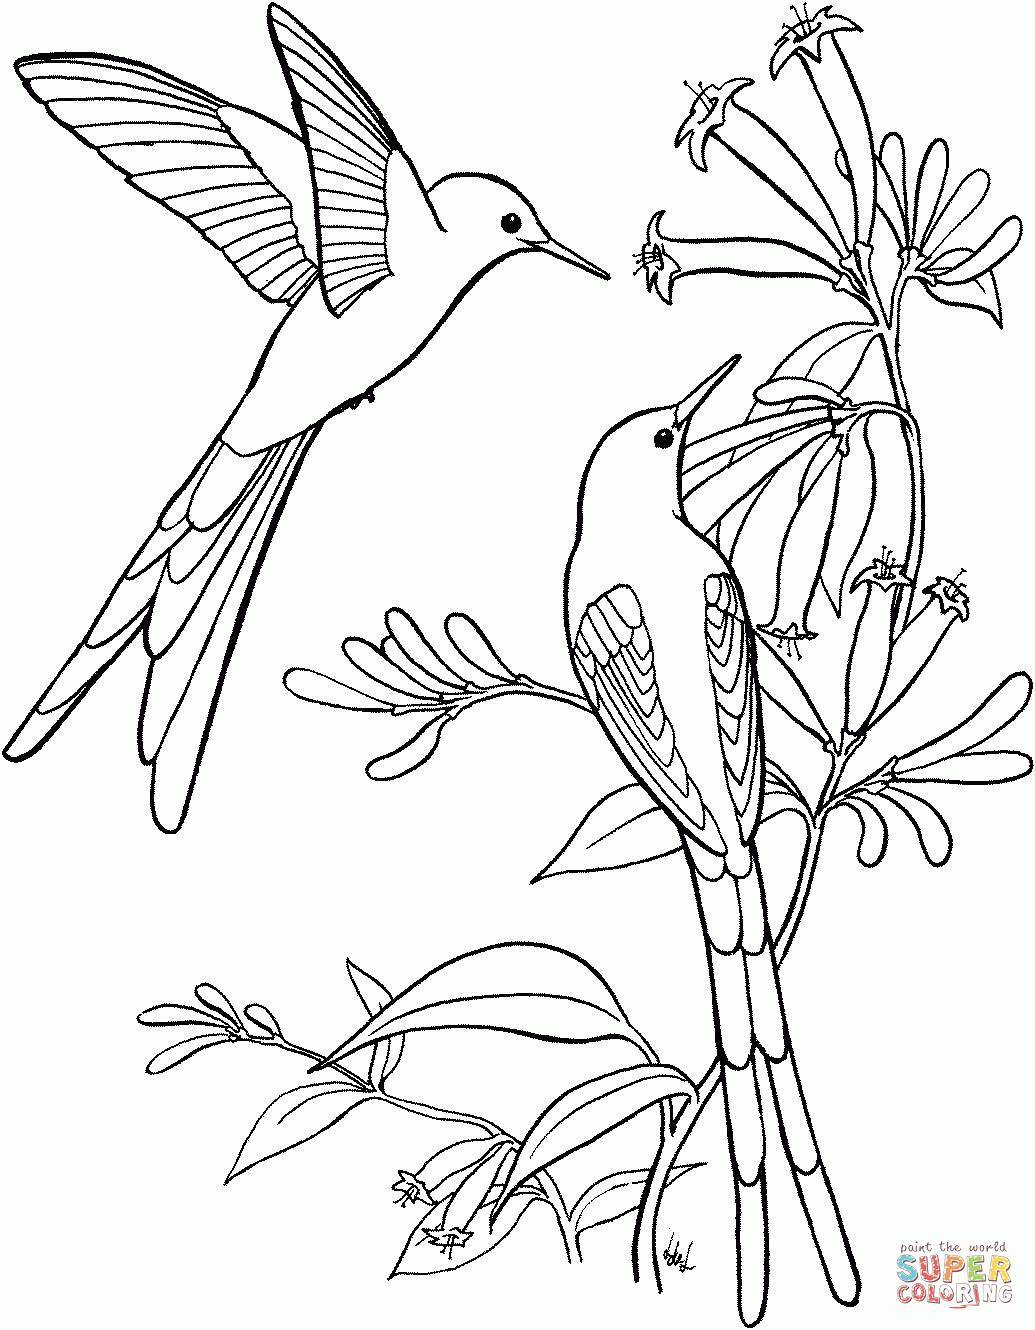 Long Tailed Sylph Hummingbird Coloring Page | Free Printable - Free Printable Pictures Of Hummingbirds